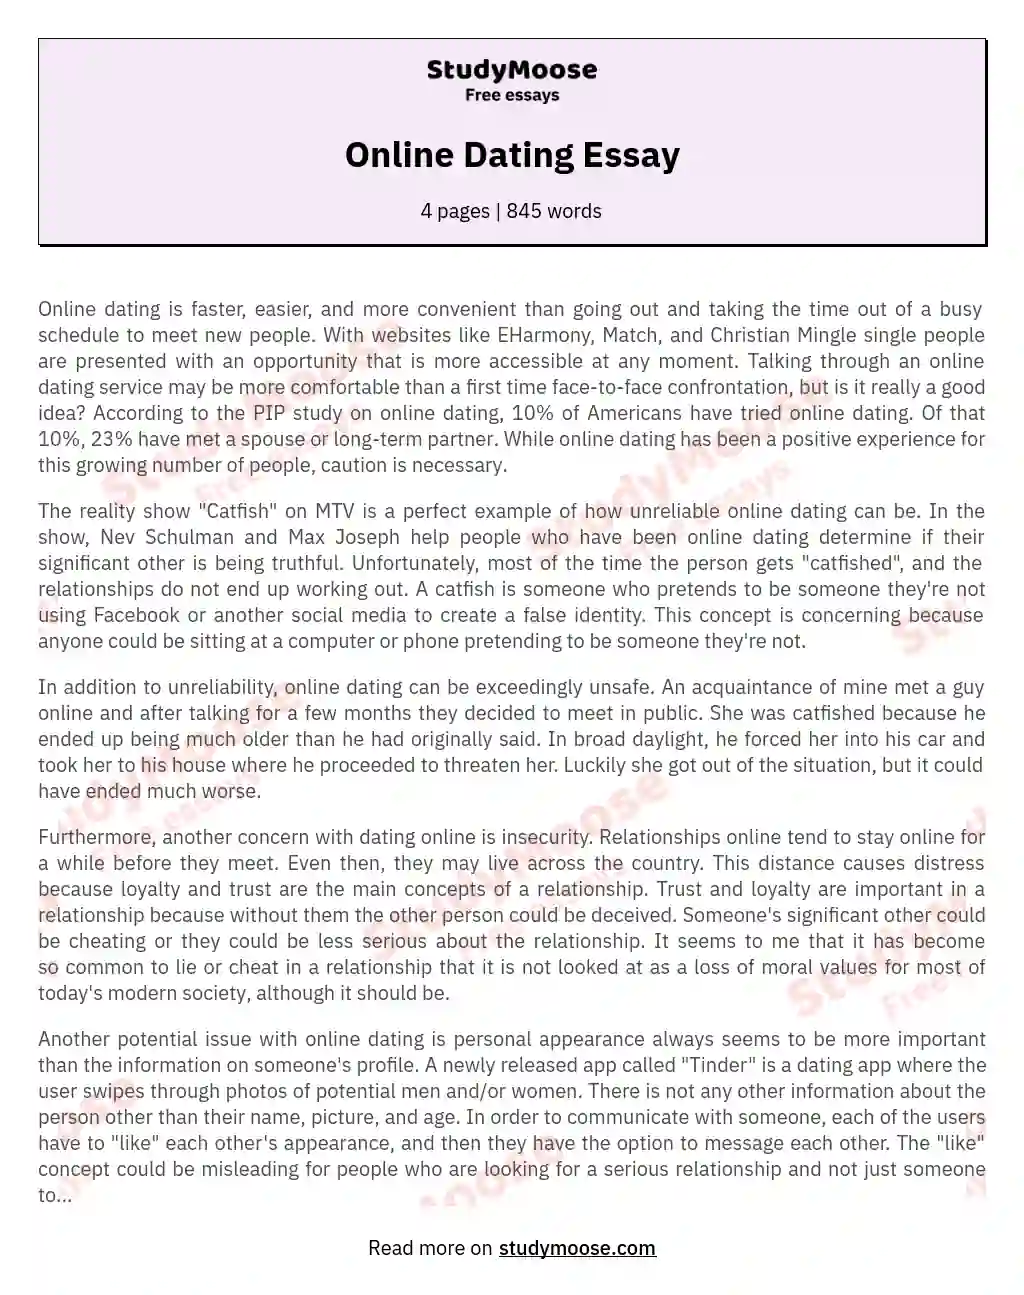 online dating essay questions